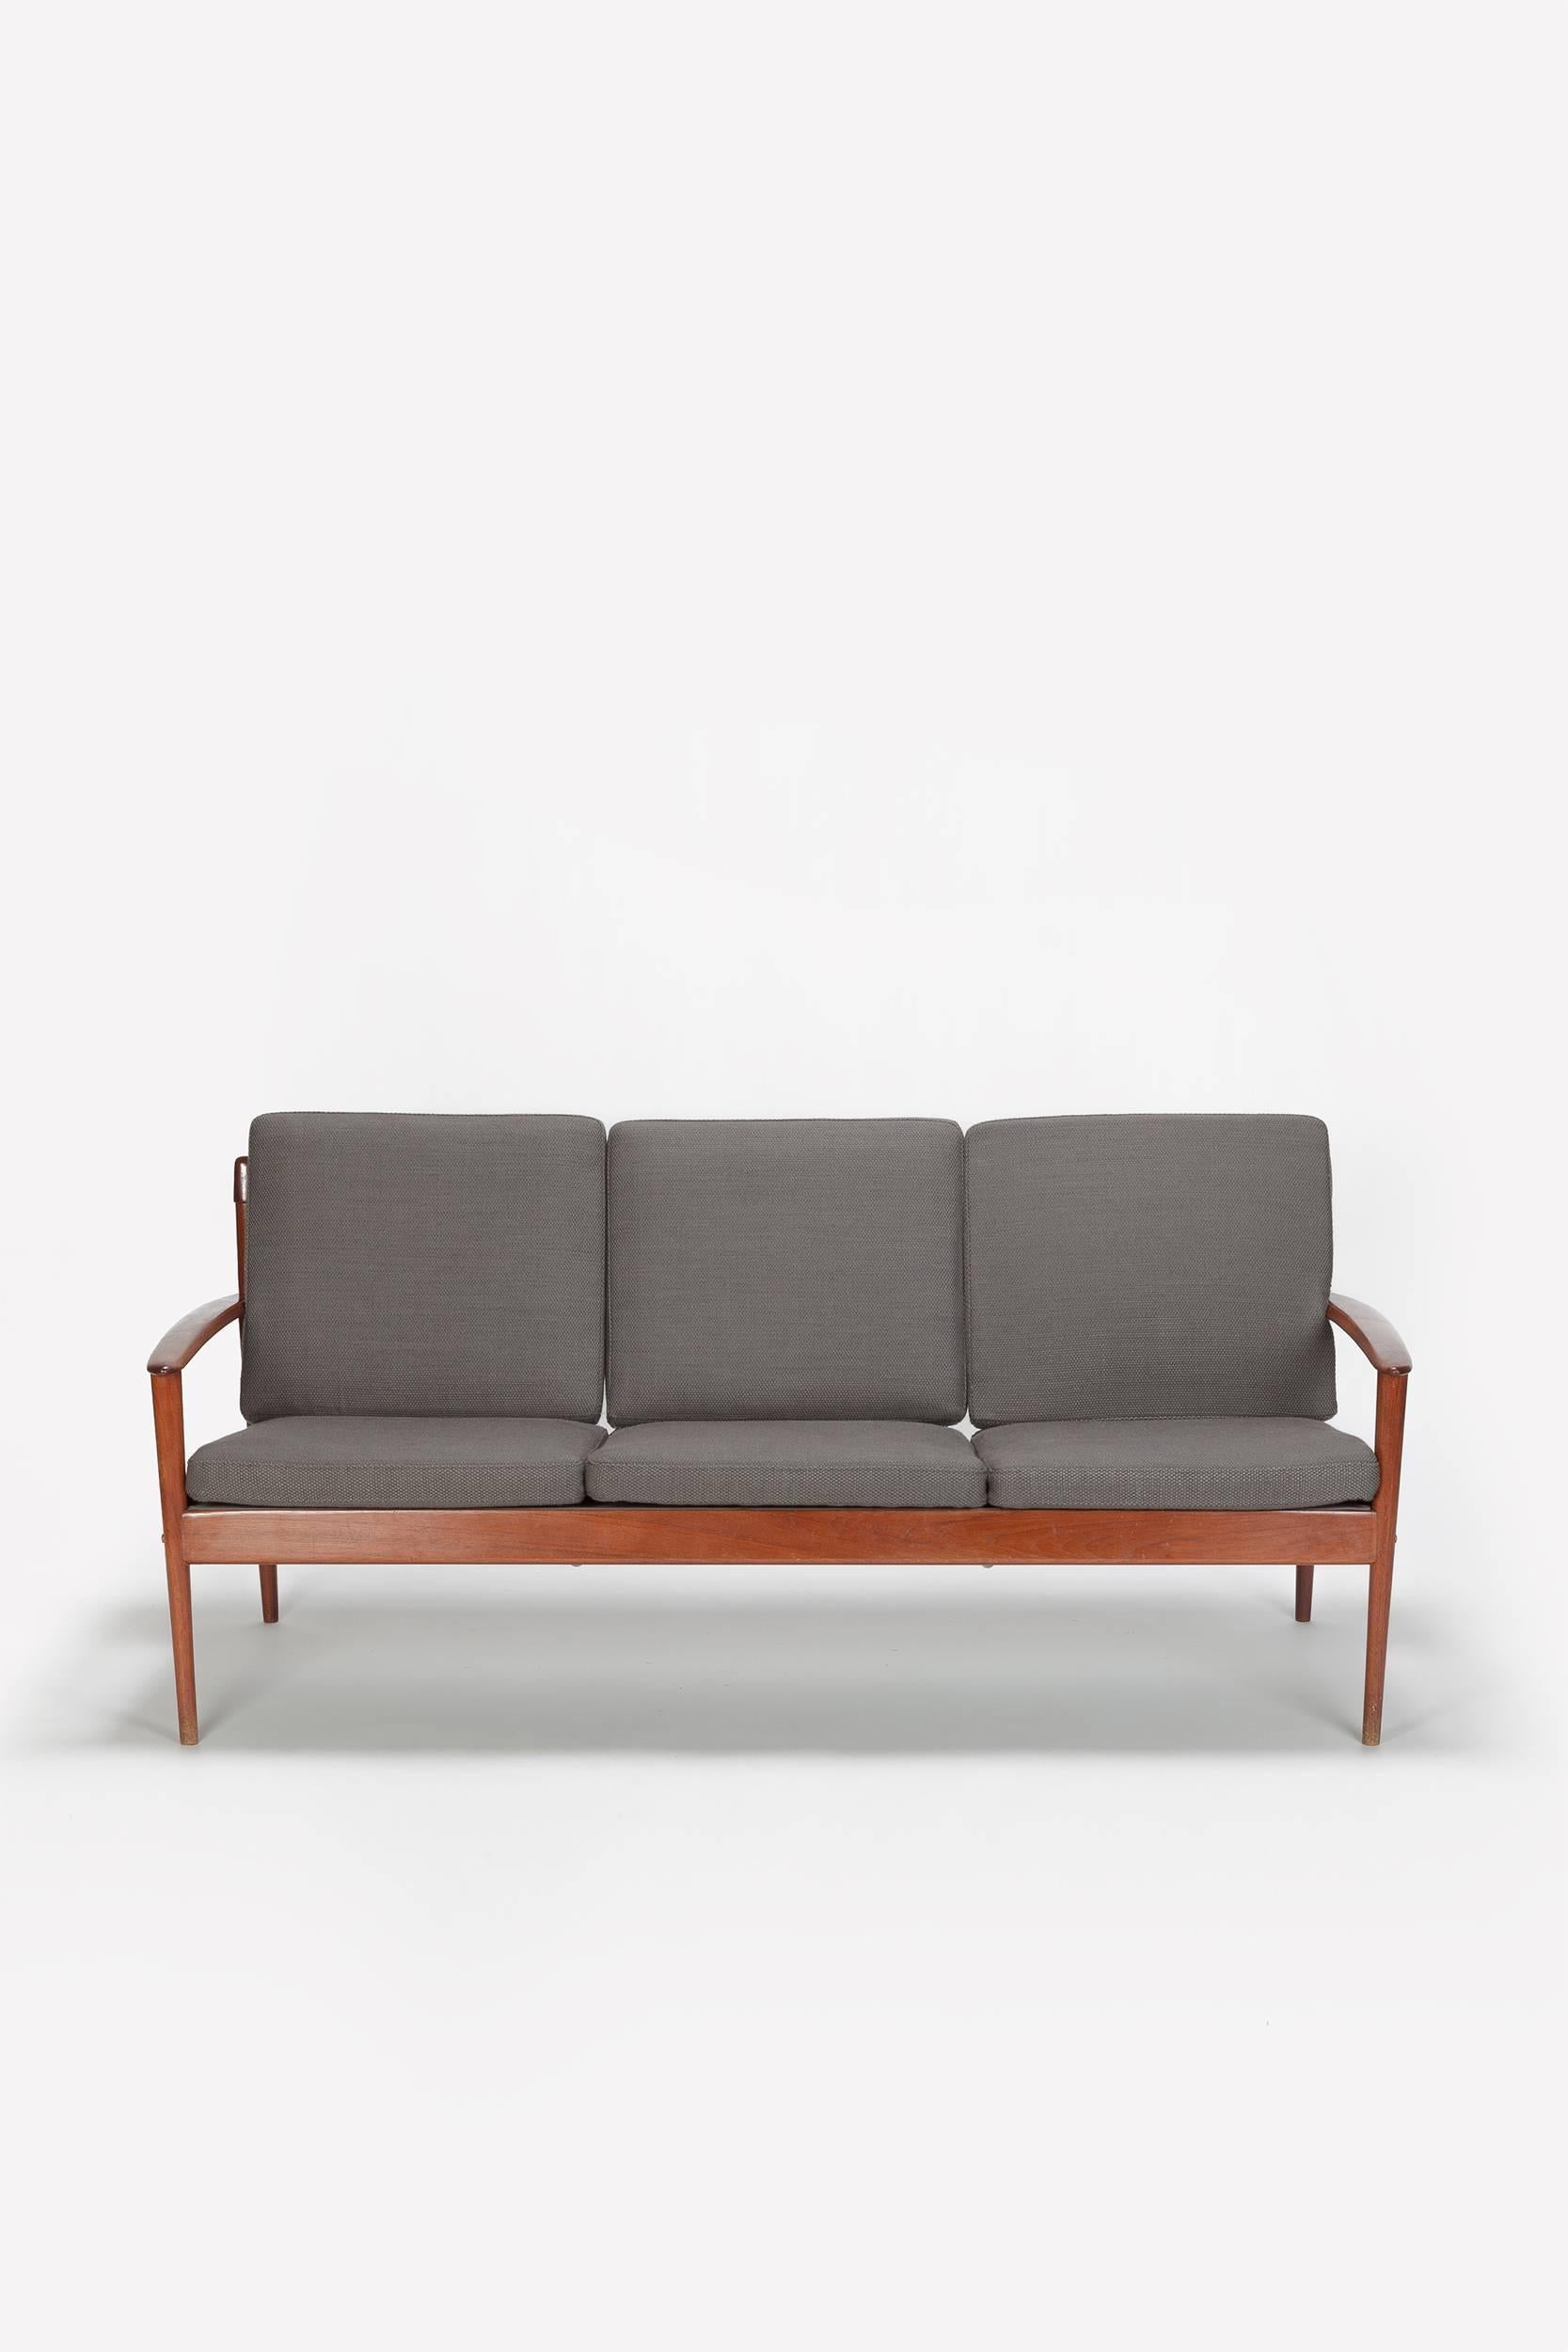 An early example of the Grete Jalk sofa model PJ 56/3 manufactured by P. Jeppesen in Denmark in the late 1950s. Solid and sophisticated teakwood frame with beautiful details, the back spears through the armrests. This wonderful detail was later